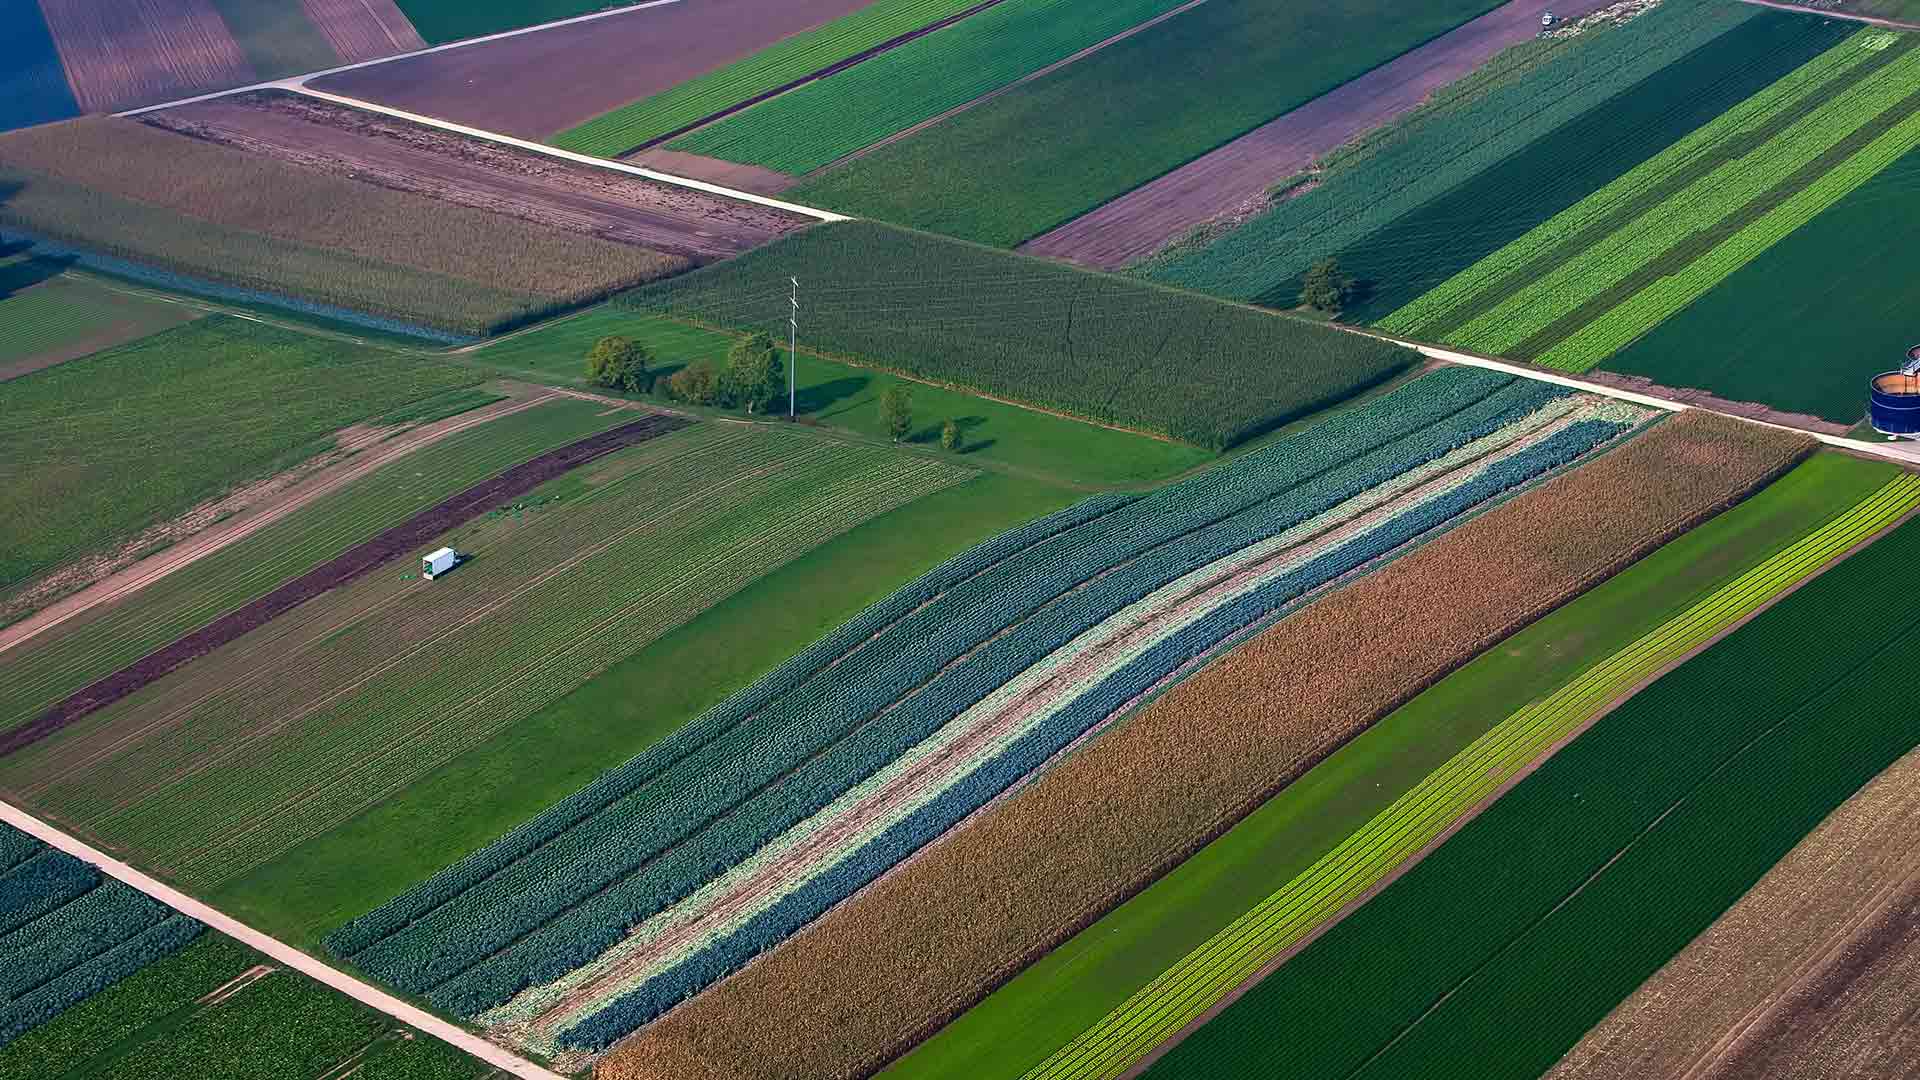 The hidden cost of food represented by a field of crops